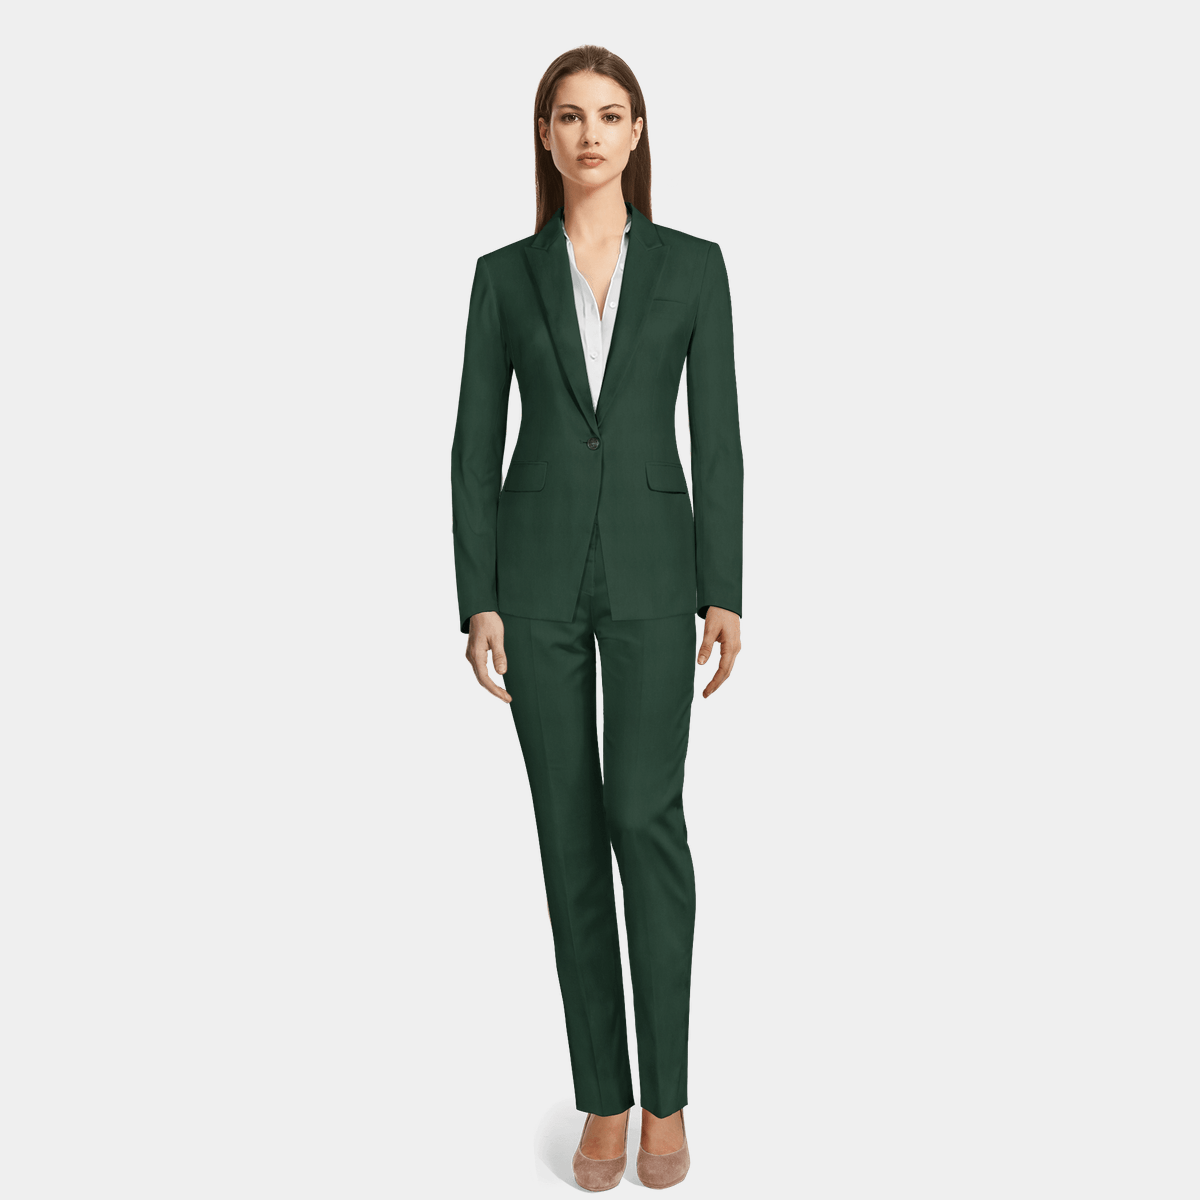 Green wool blend Woman Suit with peak lapels $329 | Sumissura